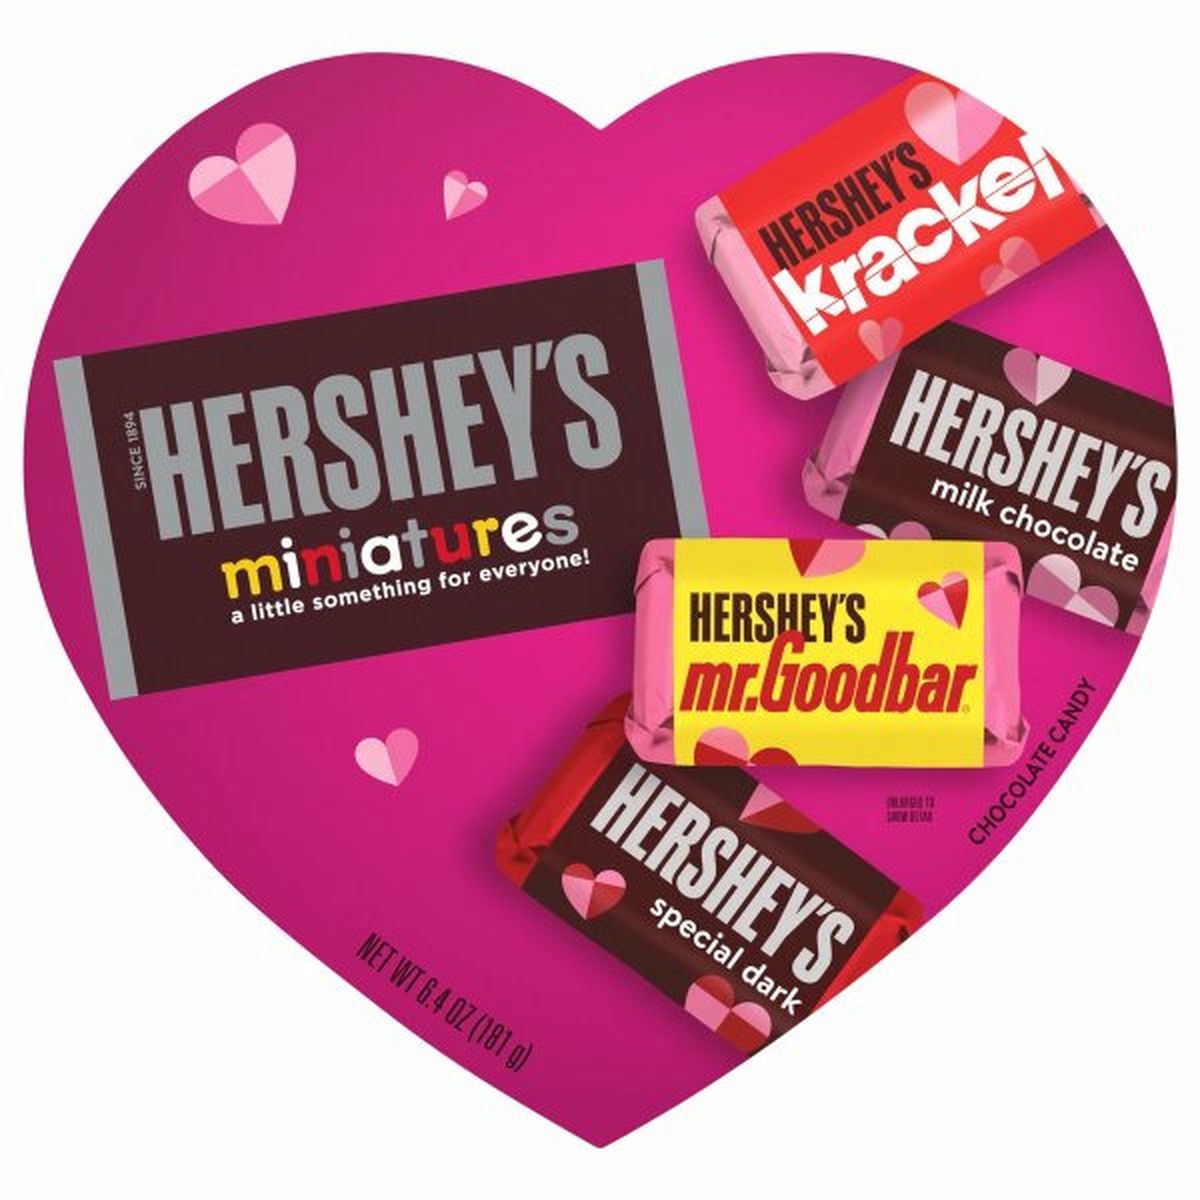 Calories in Hershey's Chocolate Candy, Miniatures